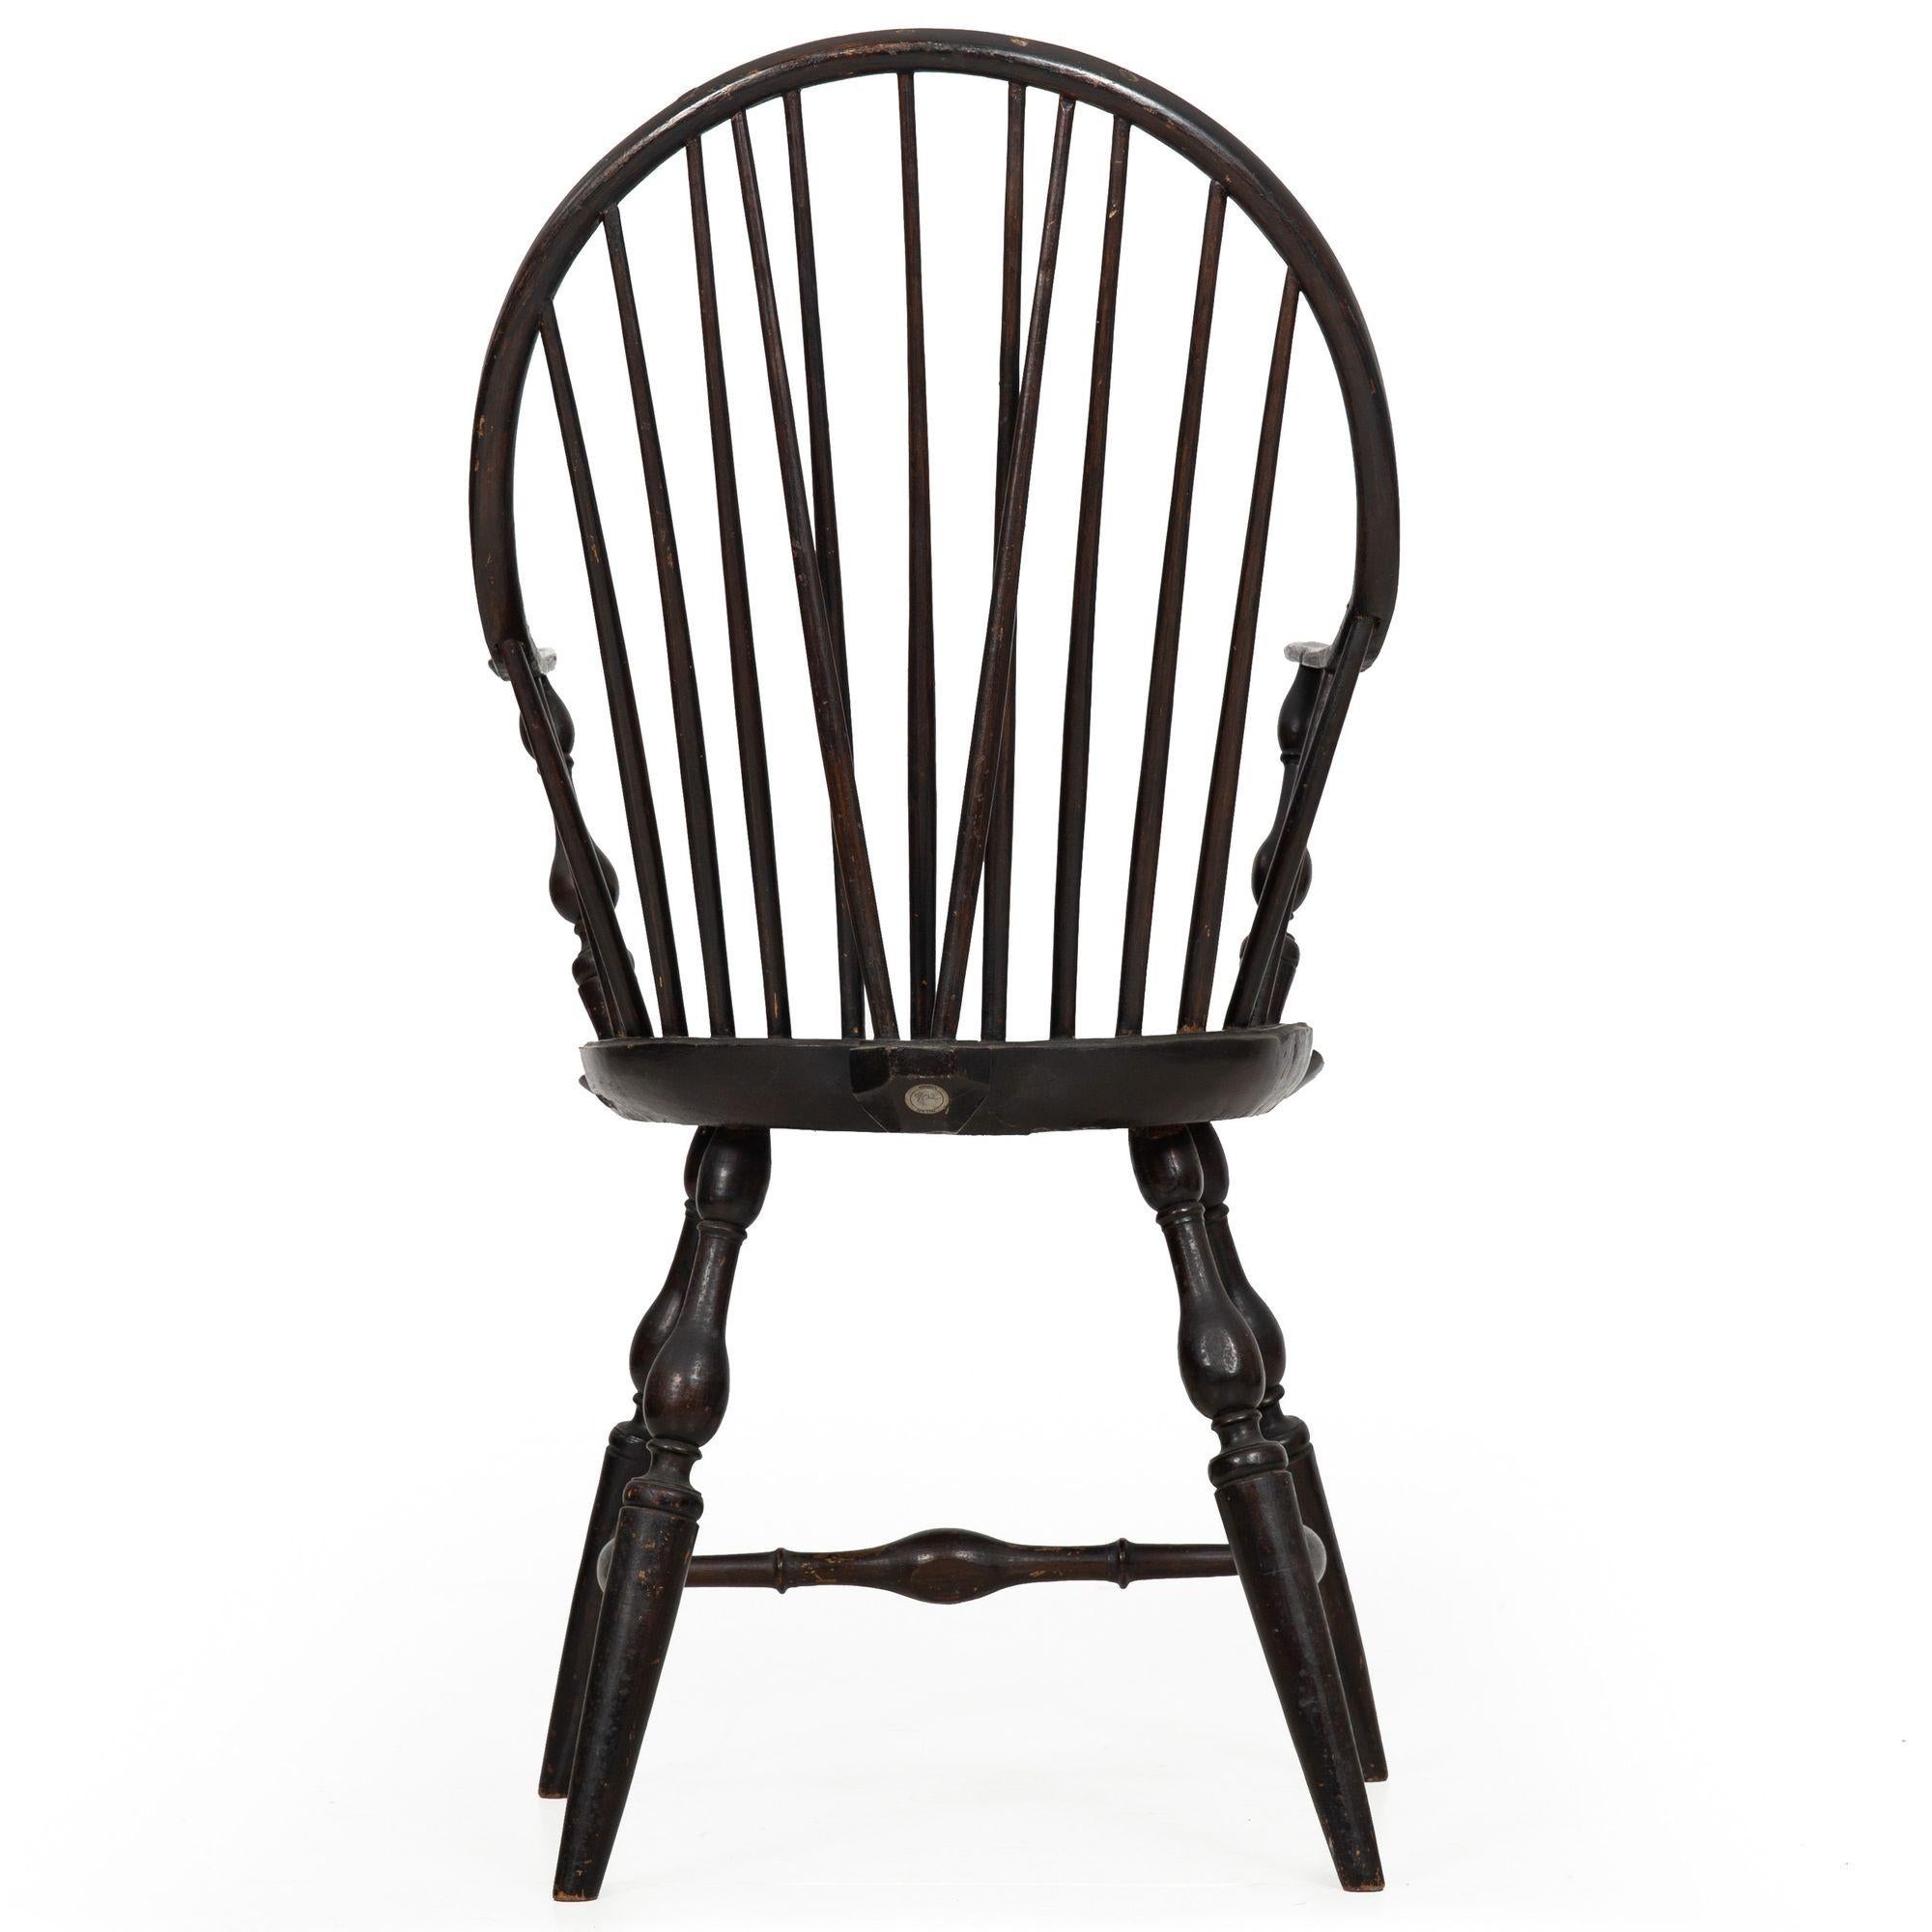 18th Century and Earlier Rare American Brace-Back Continuous Arm Windsor Chair, New York ca. 1790